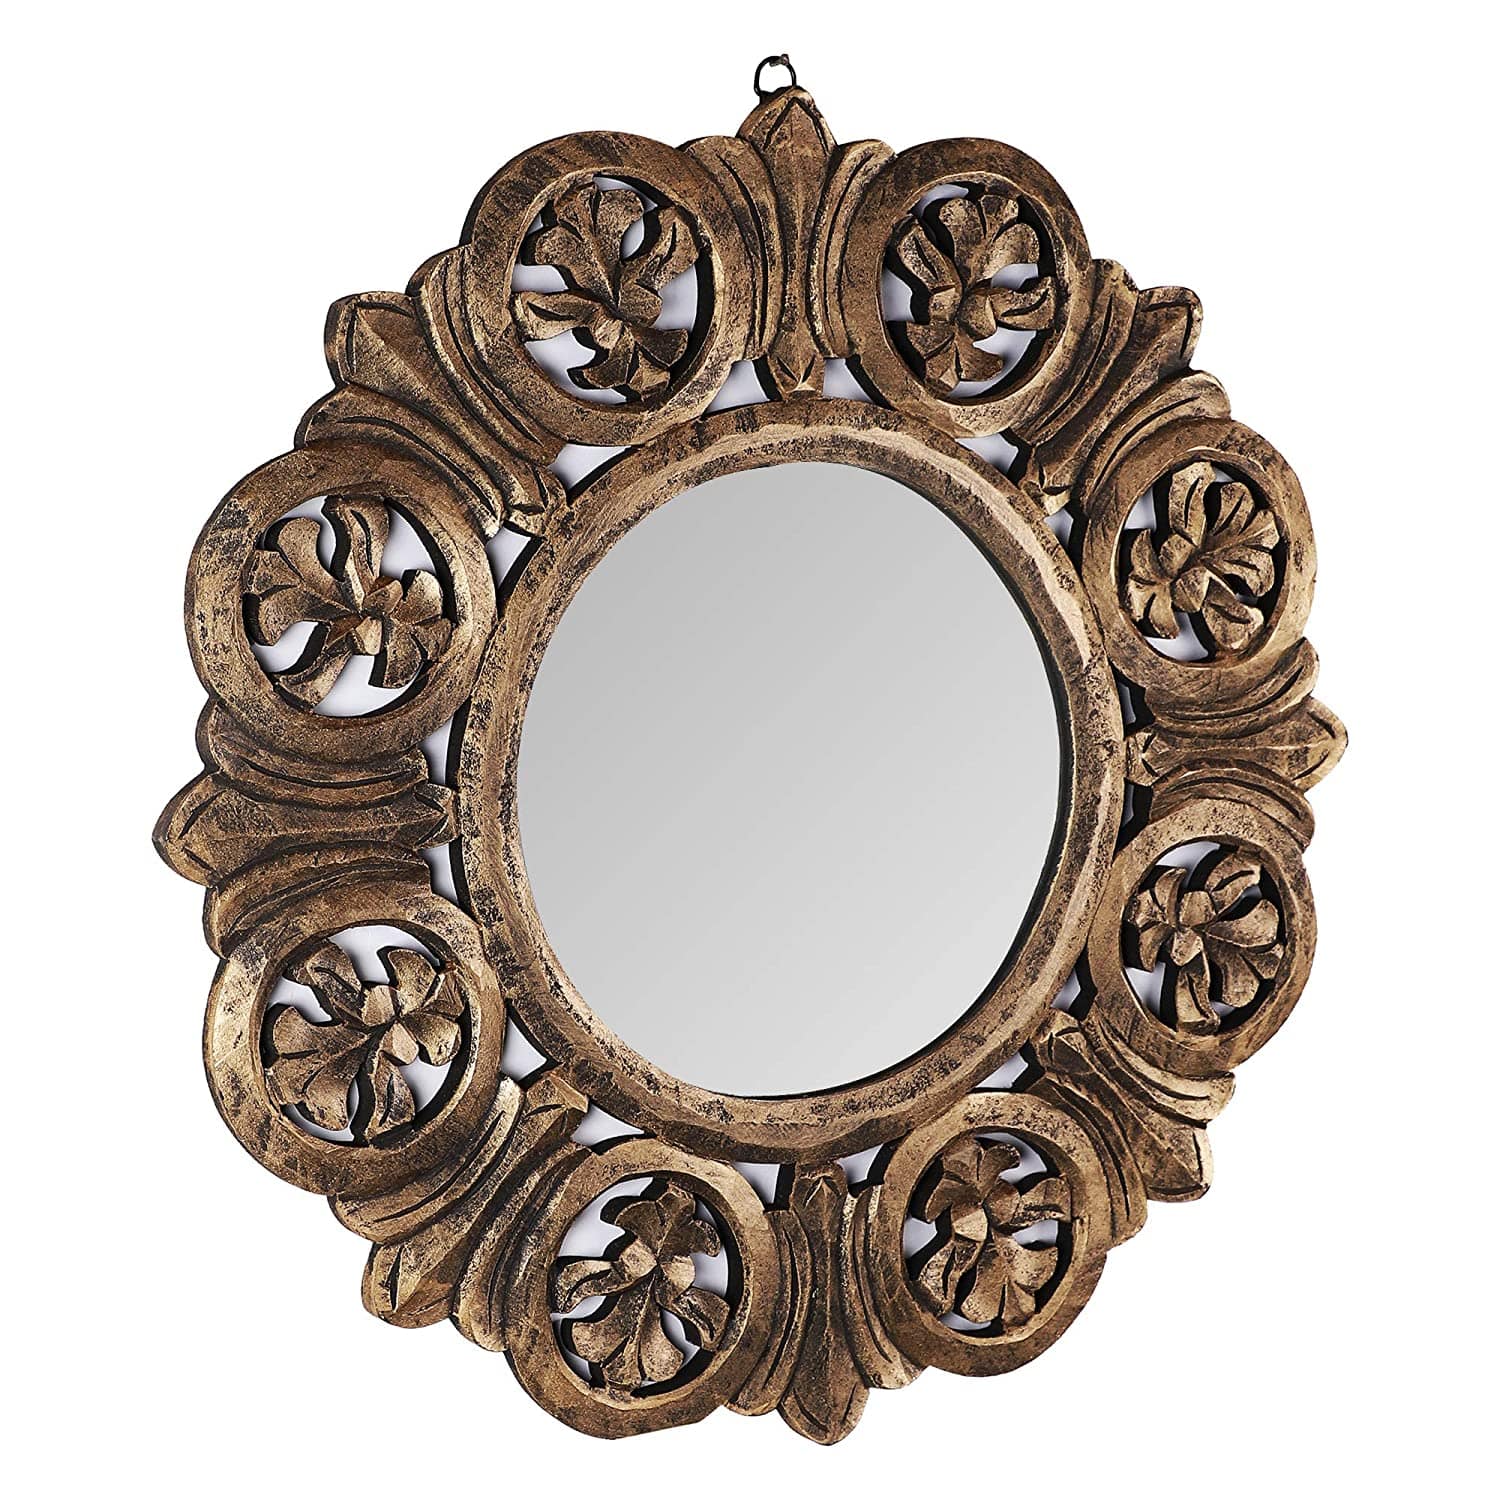 Decorative Hand Crafted Engineered Wooden Round Wall Mount Mirror Frame in Antique Gold Finish (Model: TUS-MR-50, Gold, Medium, 24 x24)